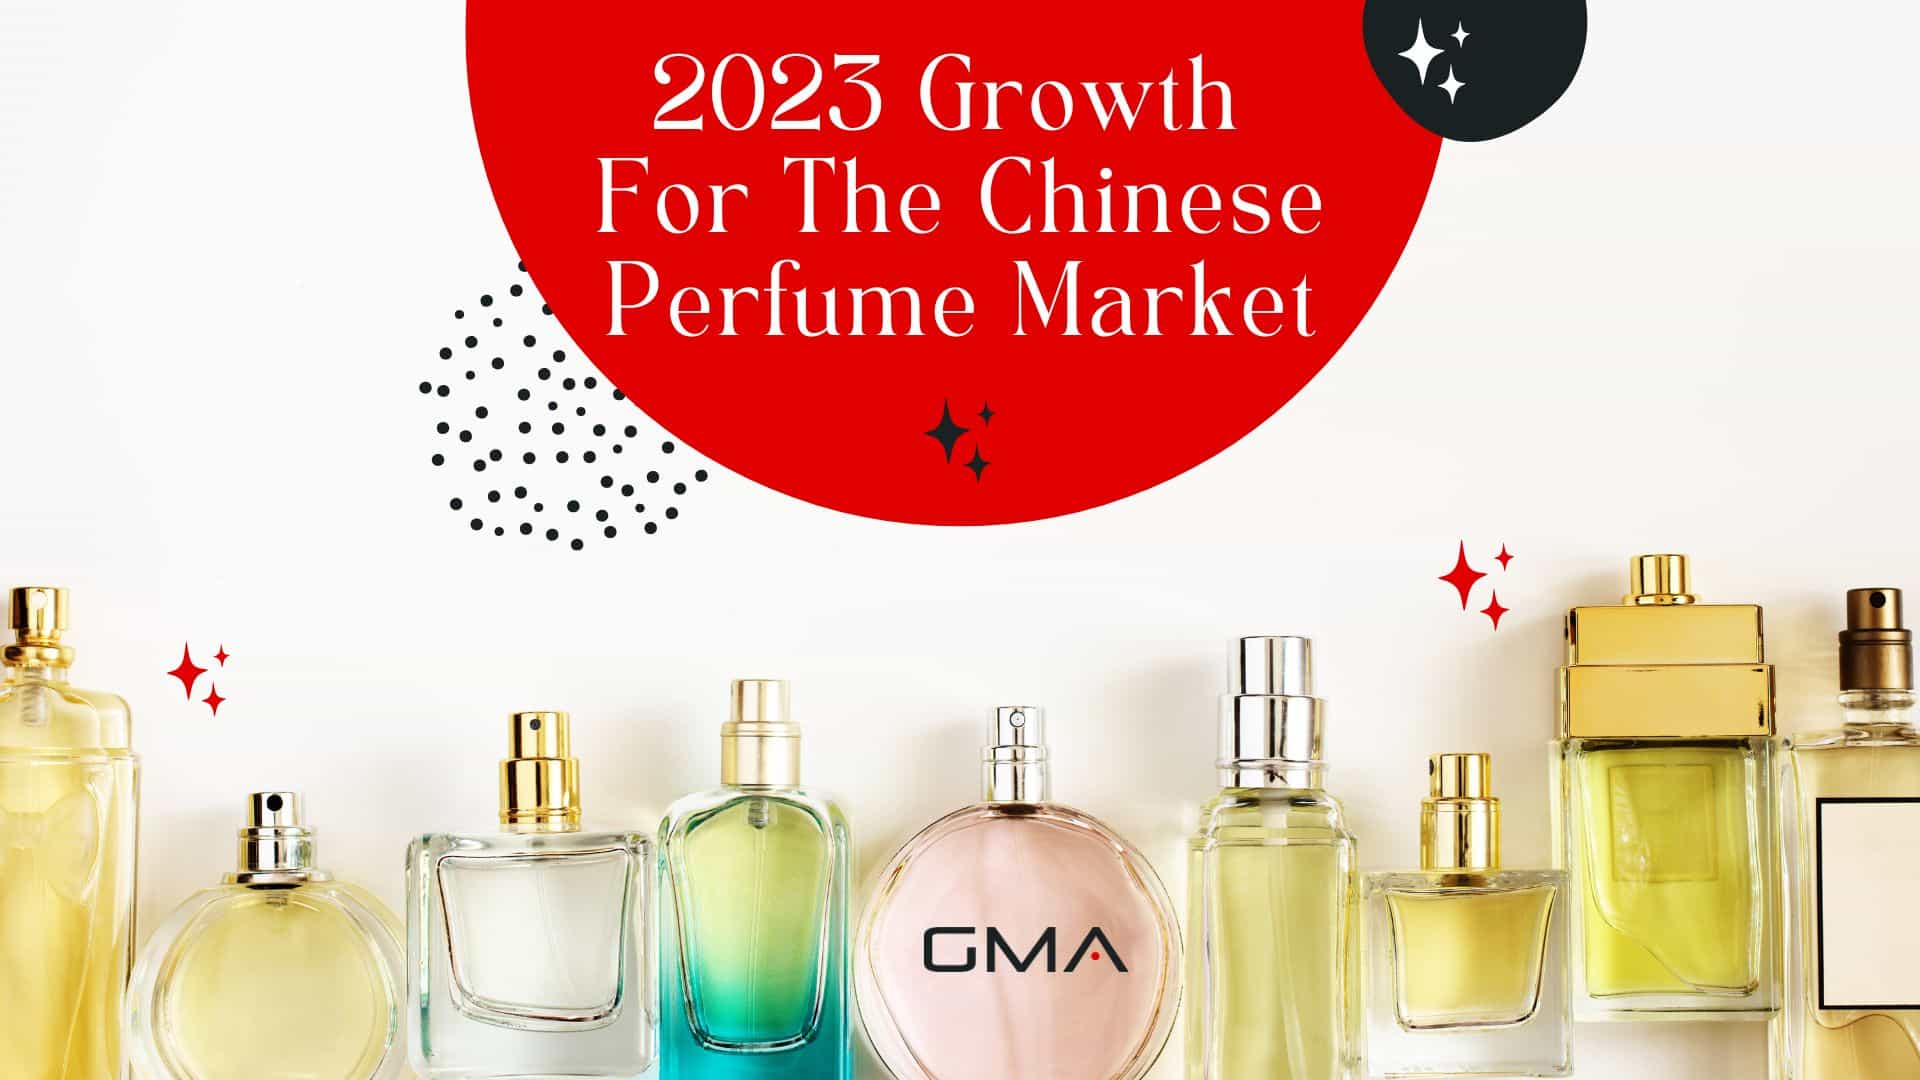 2023 Growth For The Chinese Perfume Market